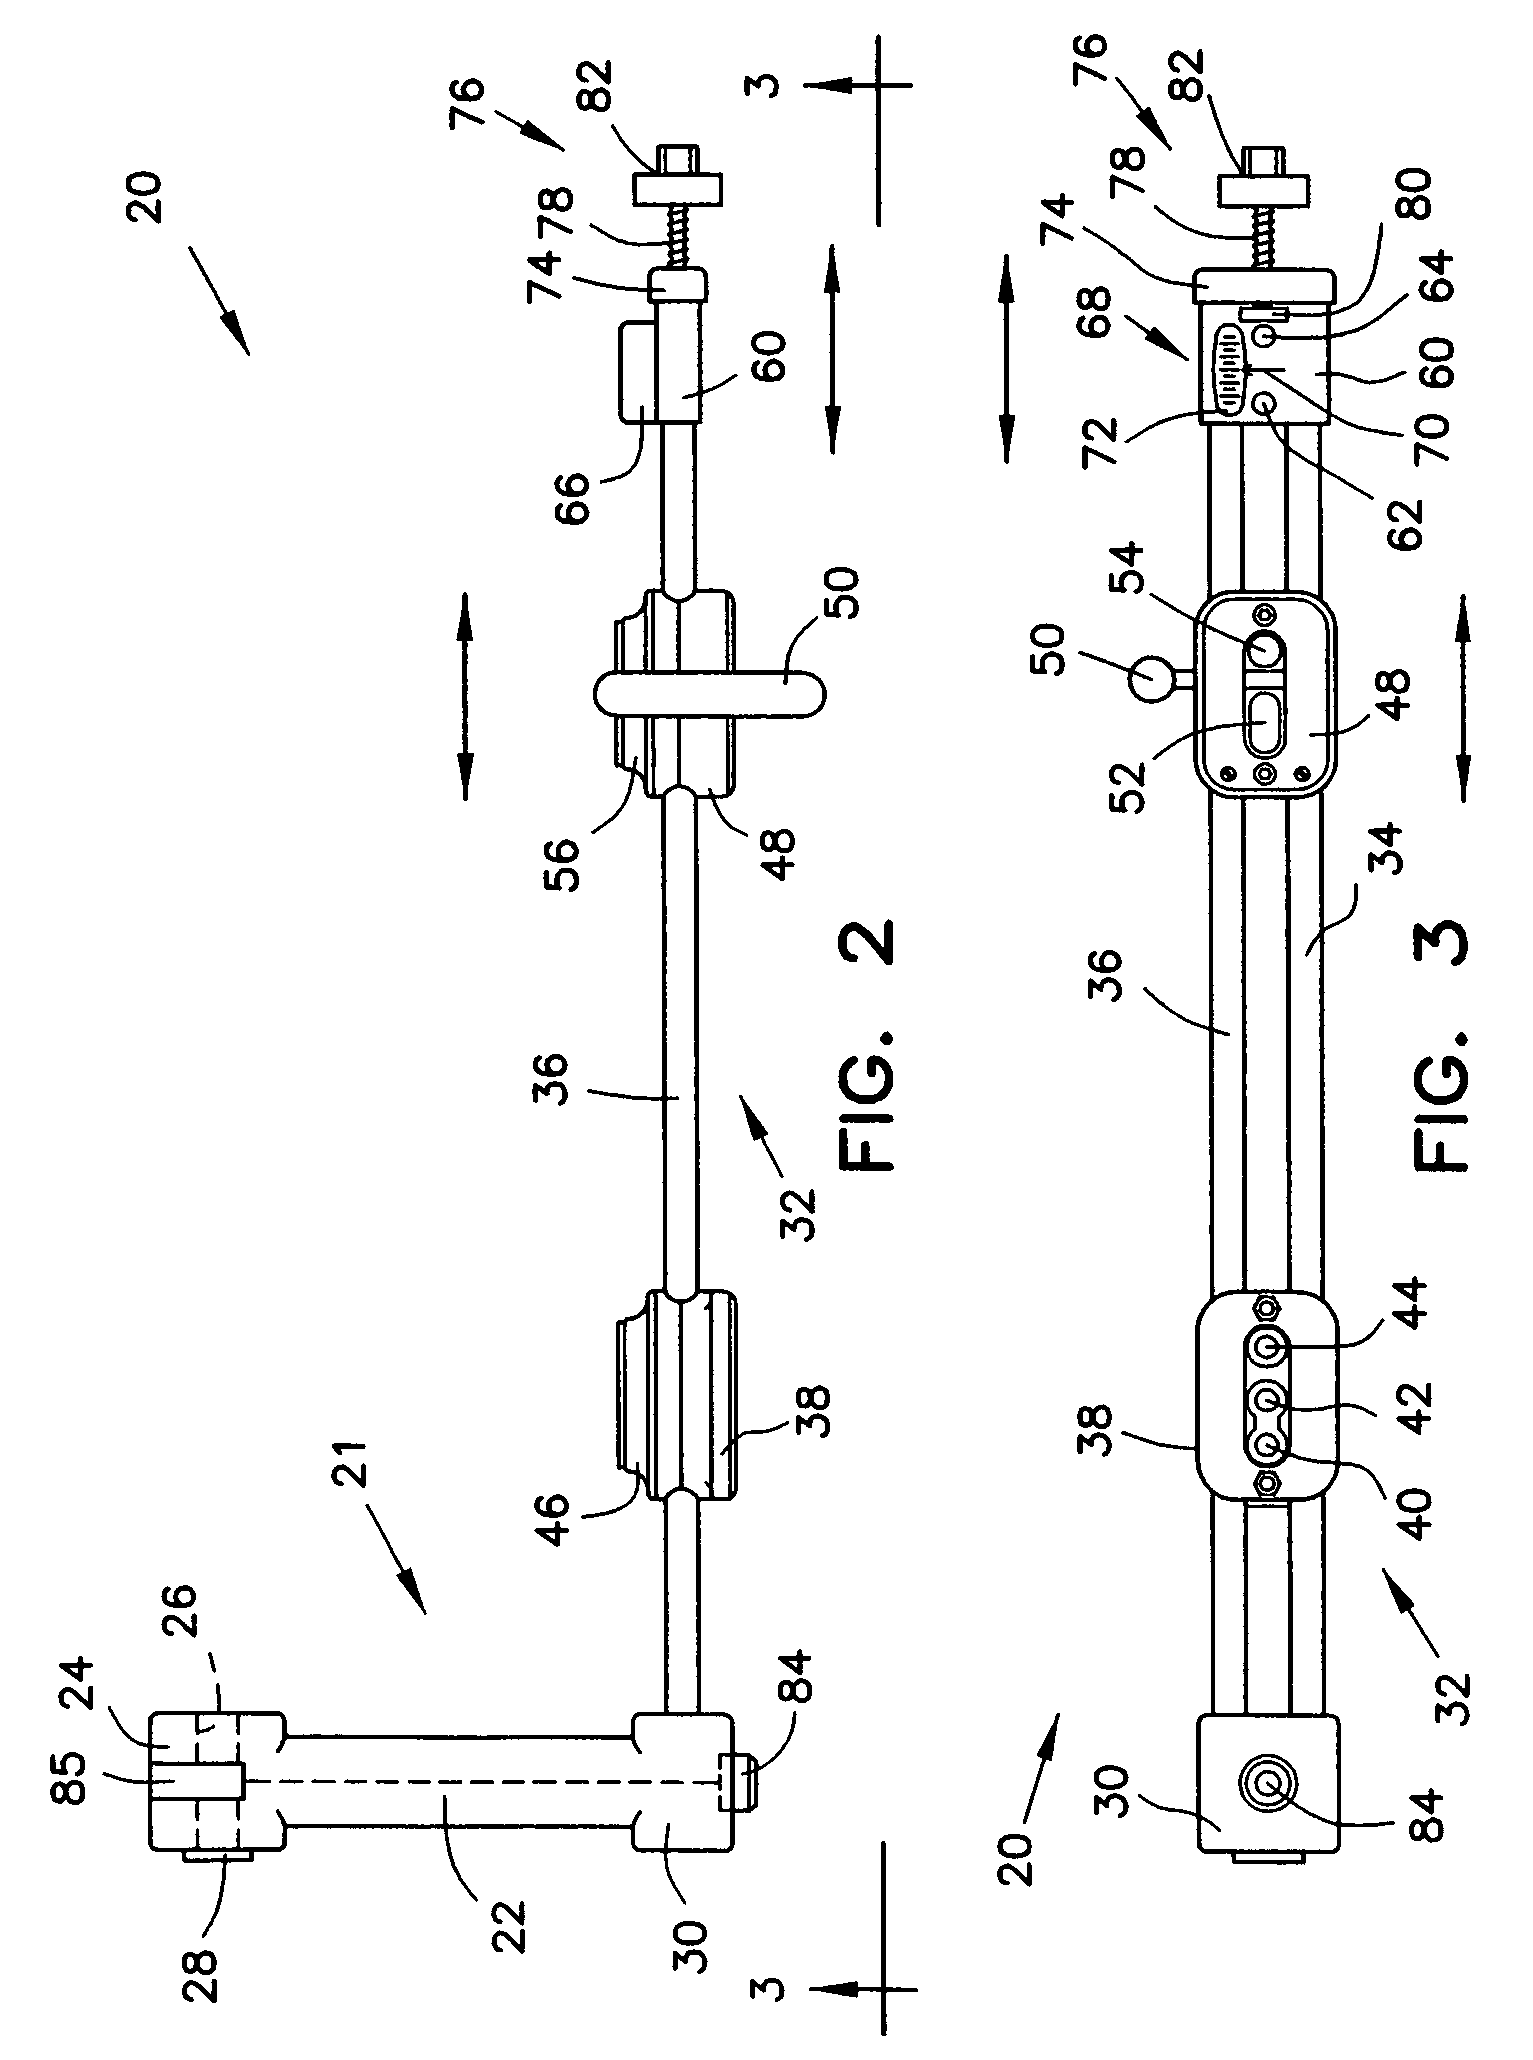 Bone fastener targeting and compression/distraction device for an intramedullary nail and method of use